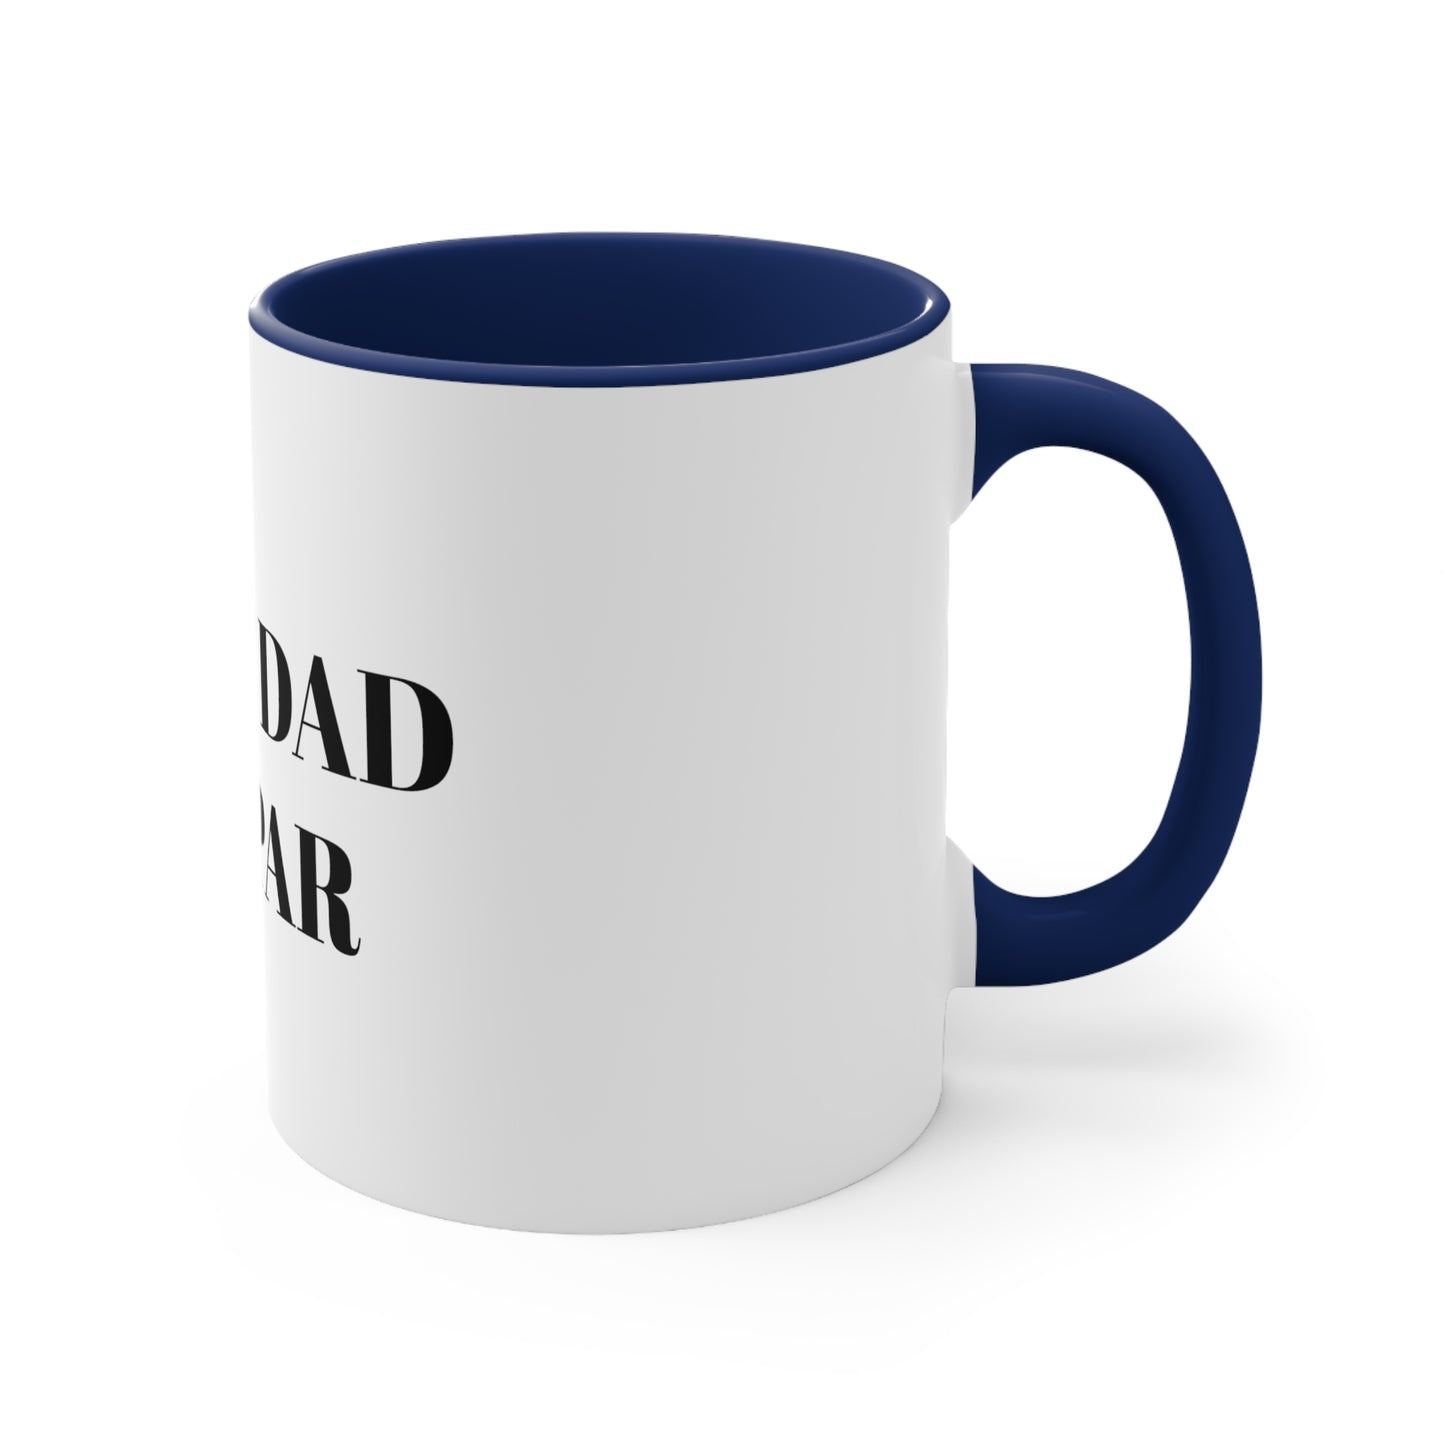 Sip Happens Collection- Best Dad Golf Accent Coffee Mug, 11oz